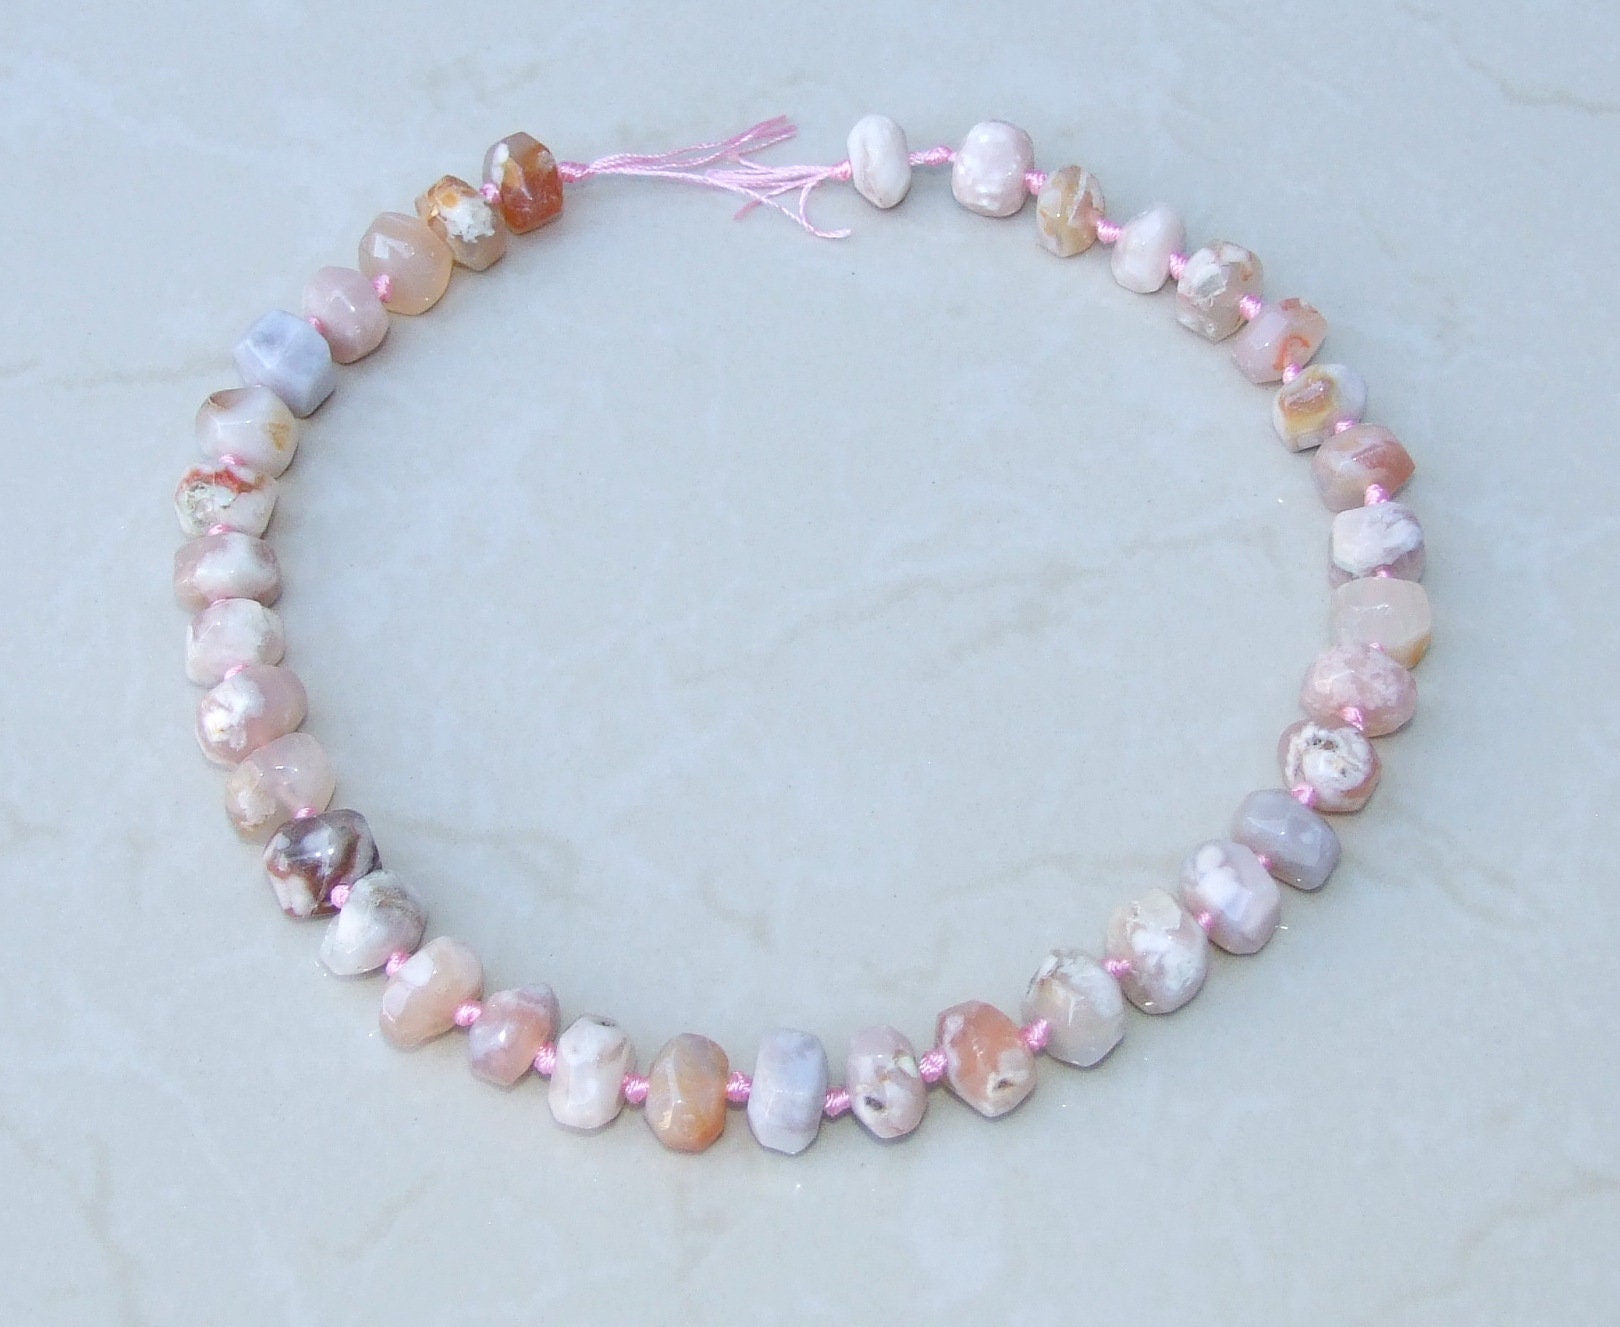 Pink Blossom Agate Faceted Nugget, Blossom Agate Pendant, Gemstone Beads, Polished Blossom Agate, Half Strand - Large 20-22mm, Small 12-14mm